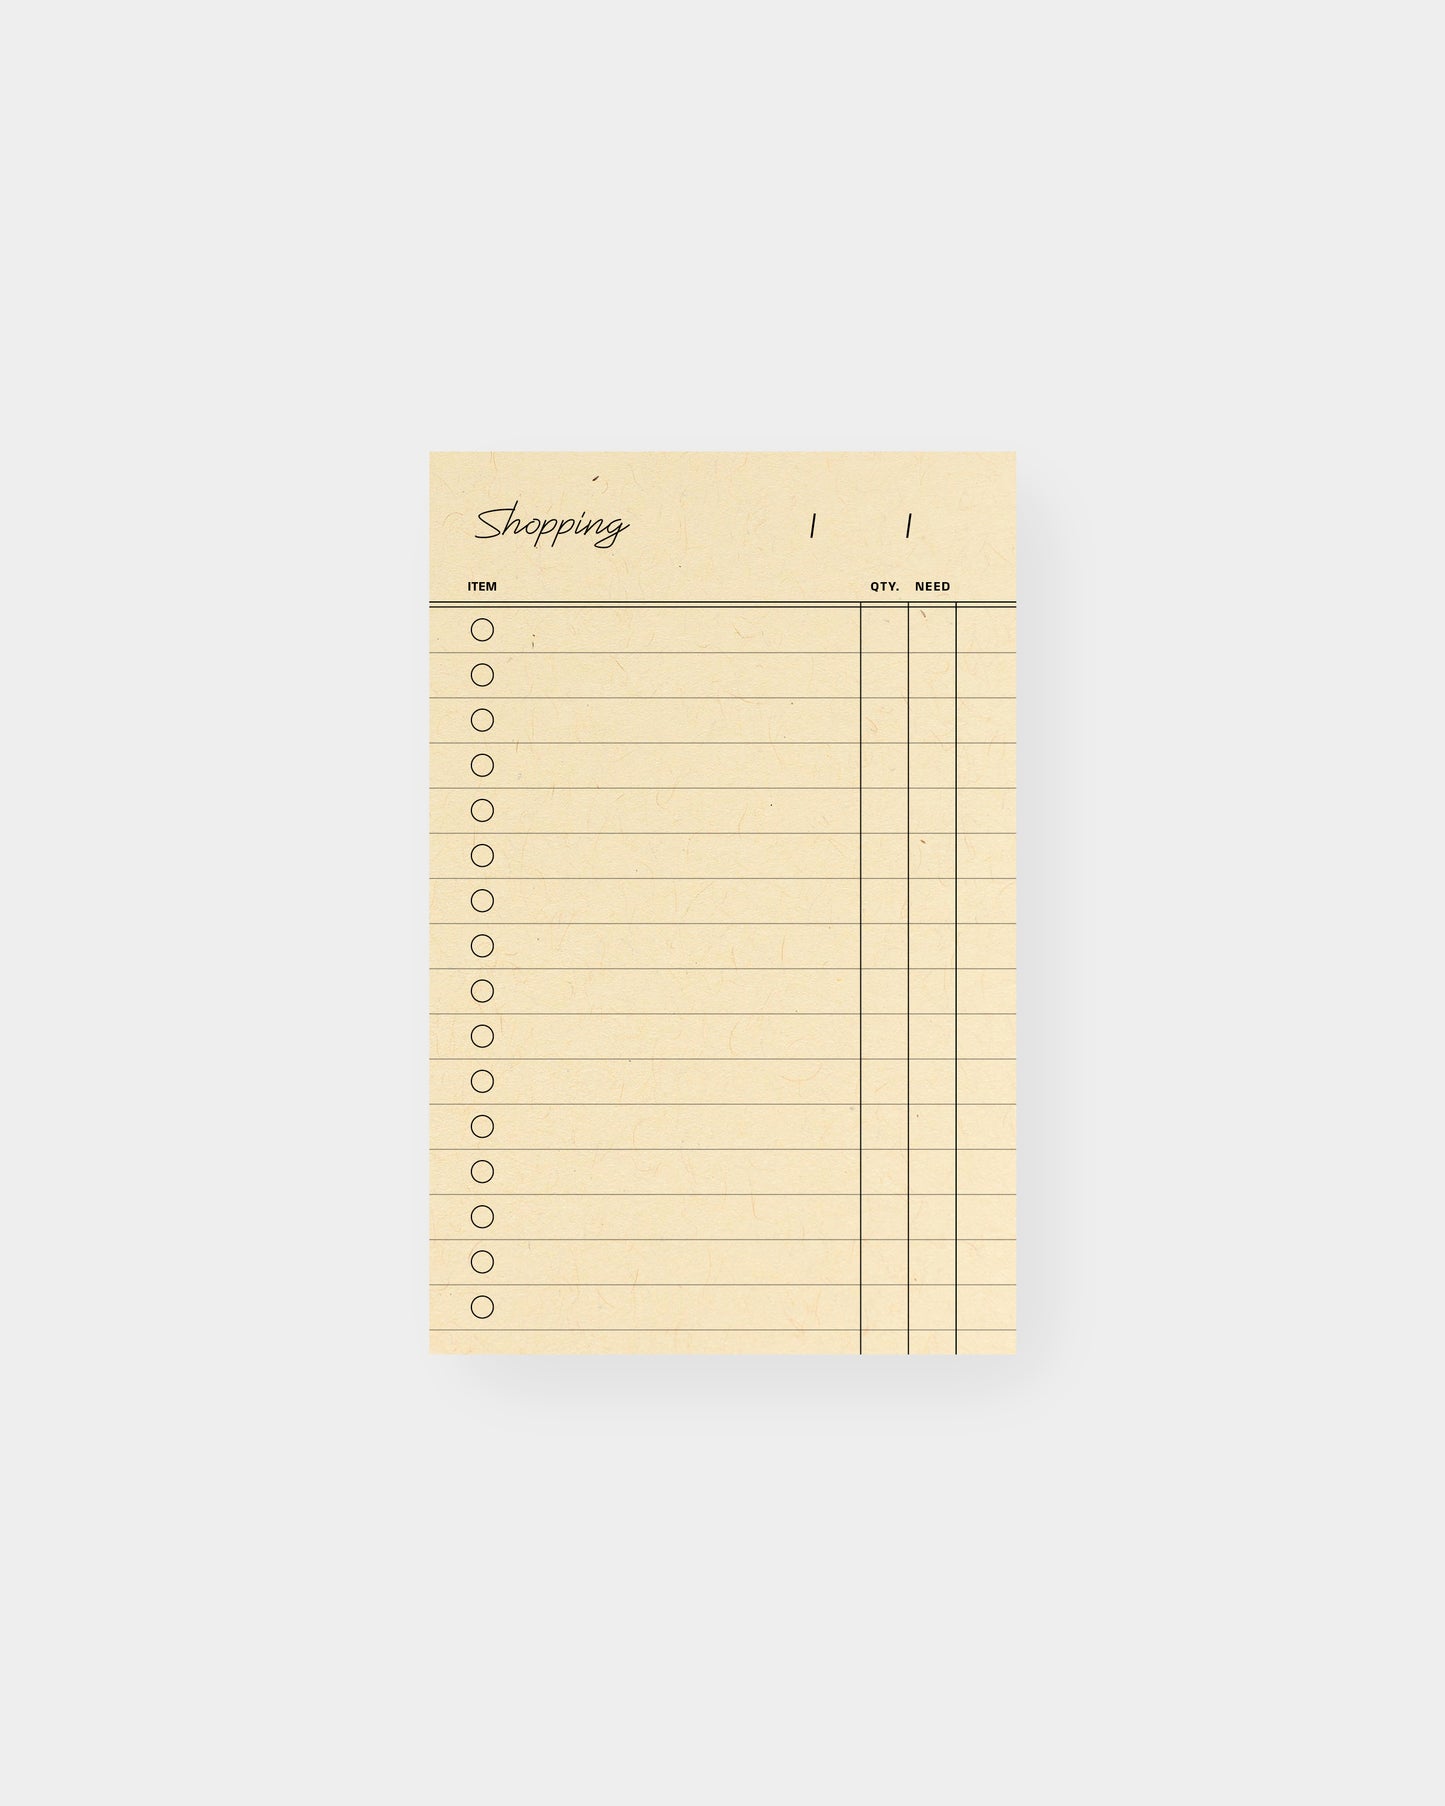 Shopping list notepad, vintage minimalist inspired design. 3.25 x 5", Manlia color way.